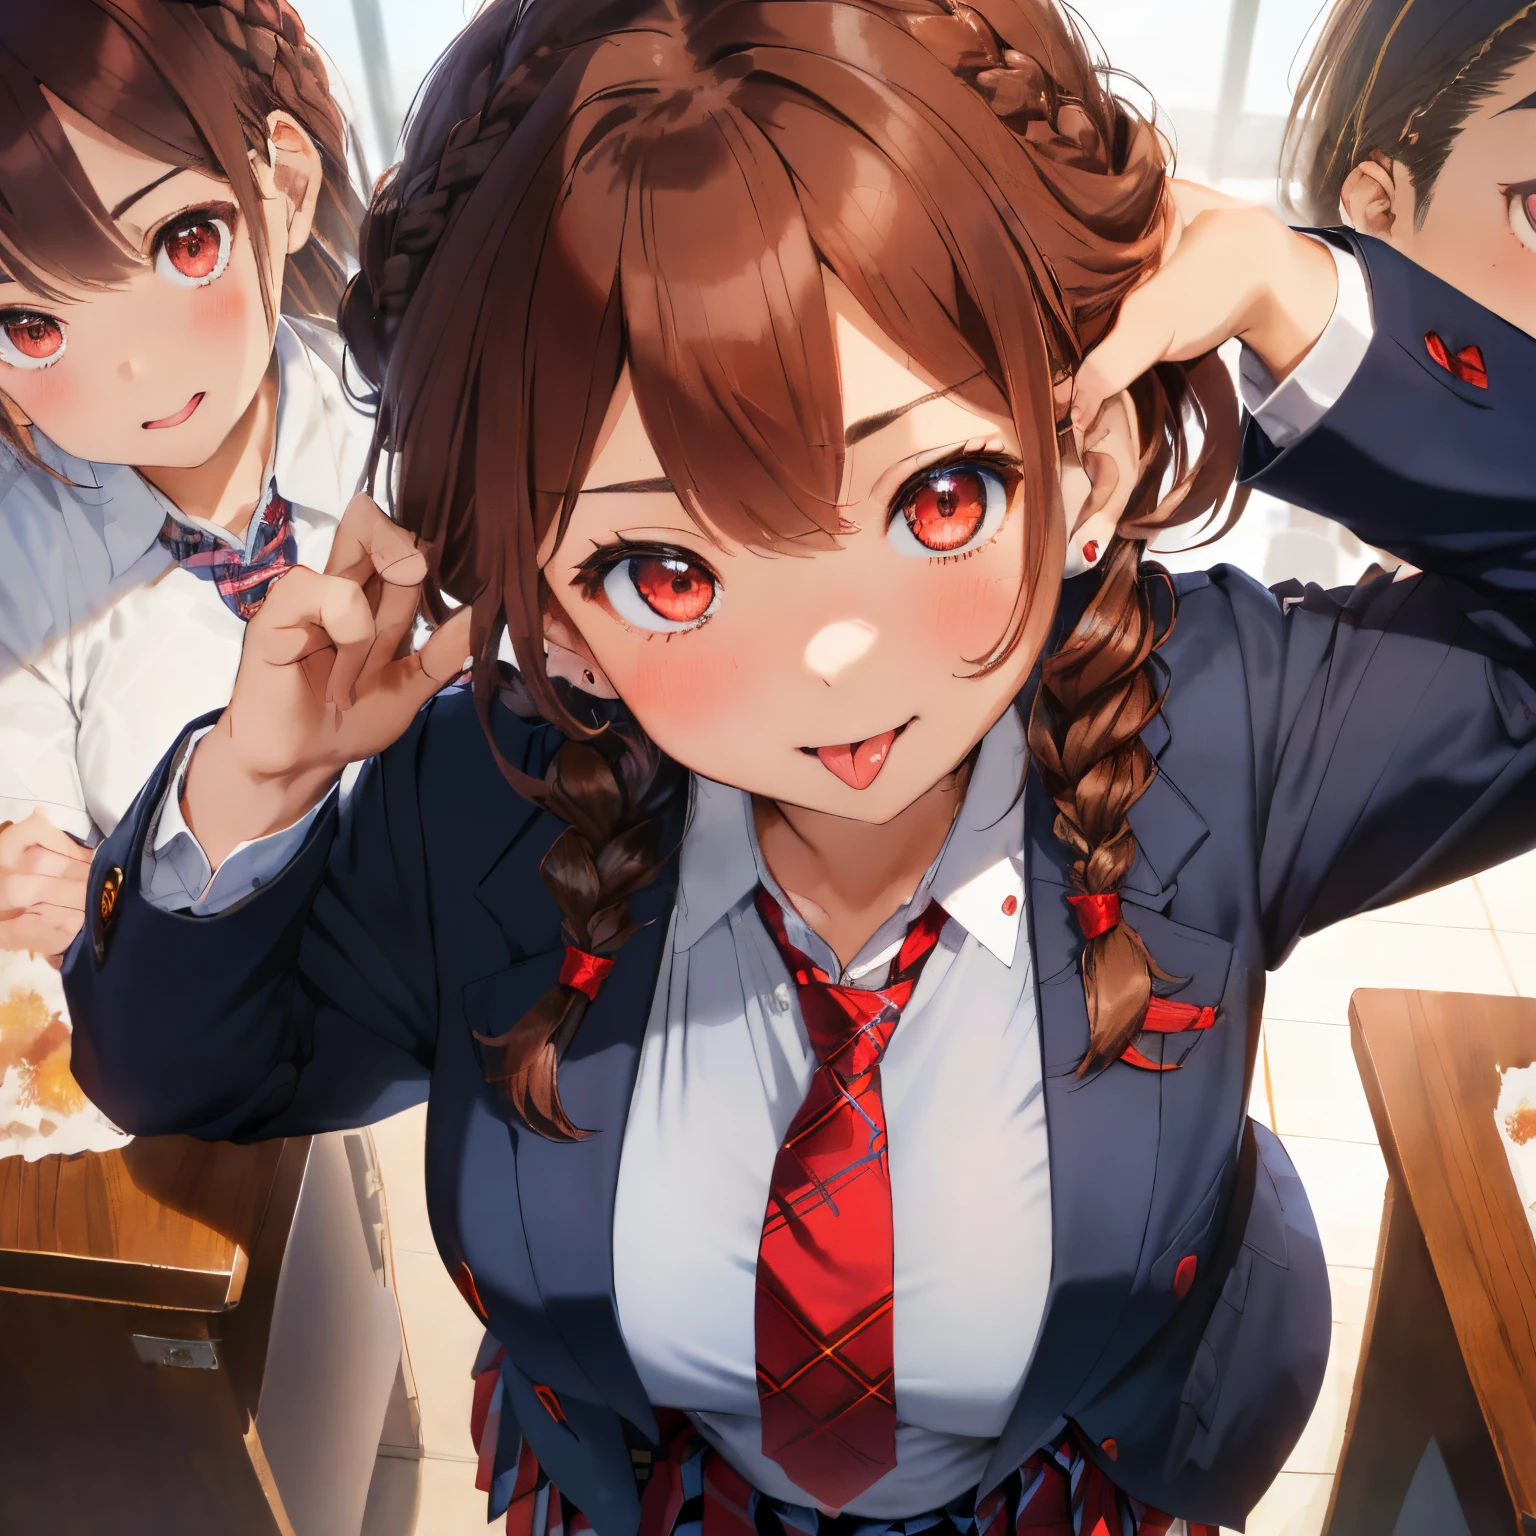 fluffy hair,((brown haired)),(Braided shorthair),Slightly red tide,((Navy blue blazer and plaid pleated skirt)),(High school students),((Red tie)),Kamimei,Looking at me with a smile,((Perspective from above)),(close up of face),(Open your mouth and show your tongue),(涎),Cute pose with hand on the side of the face